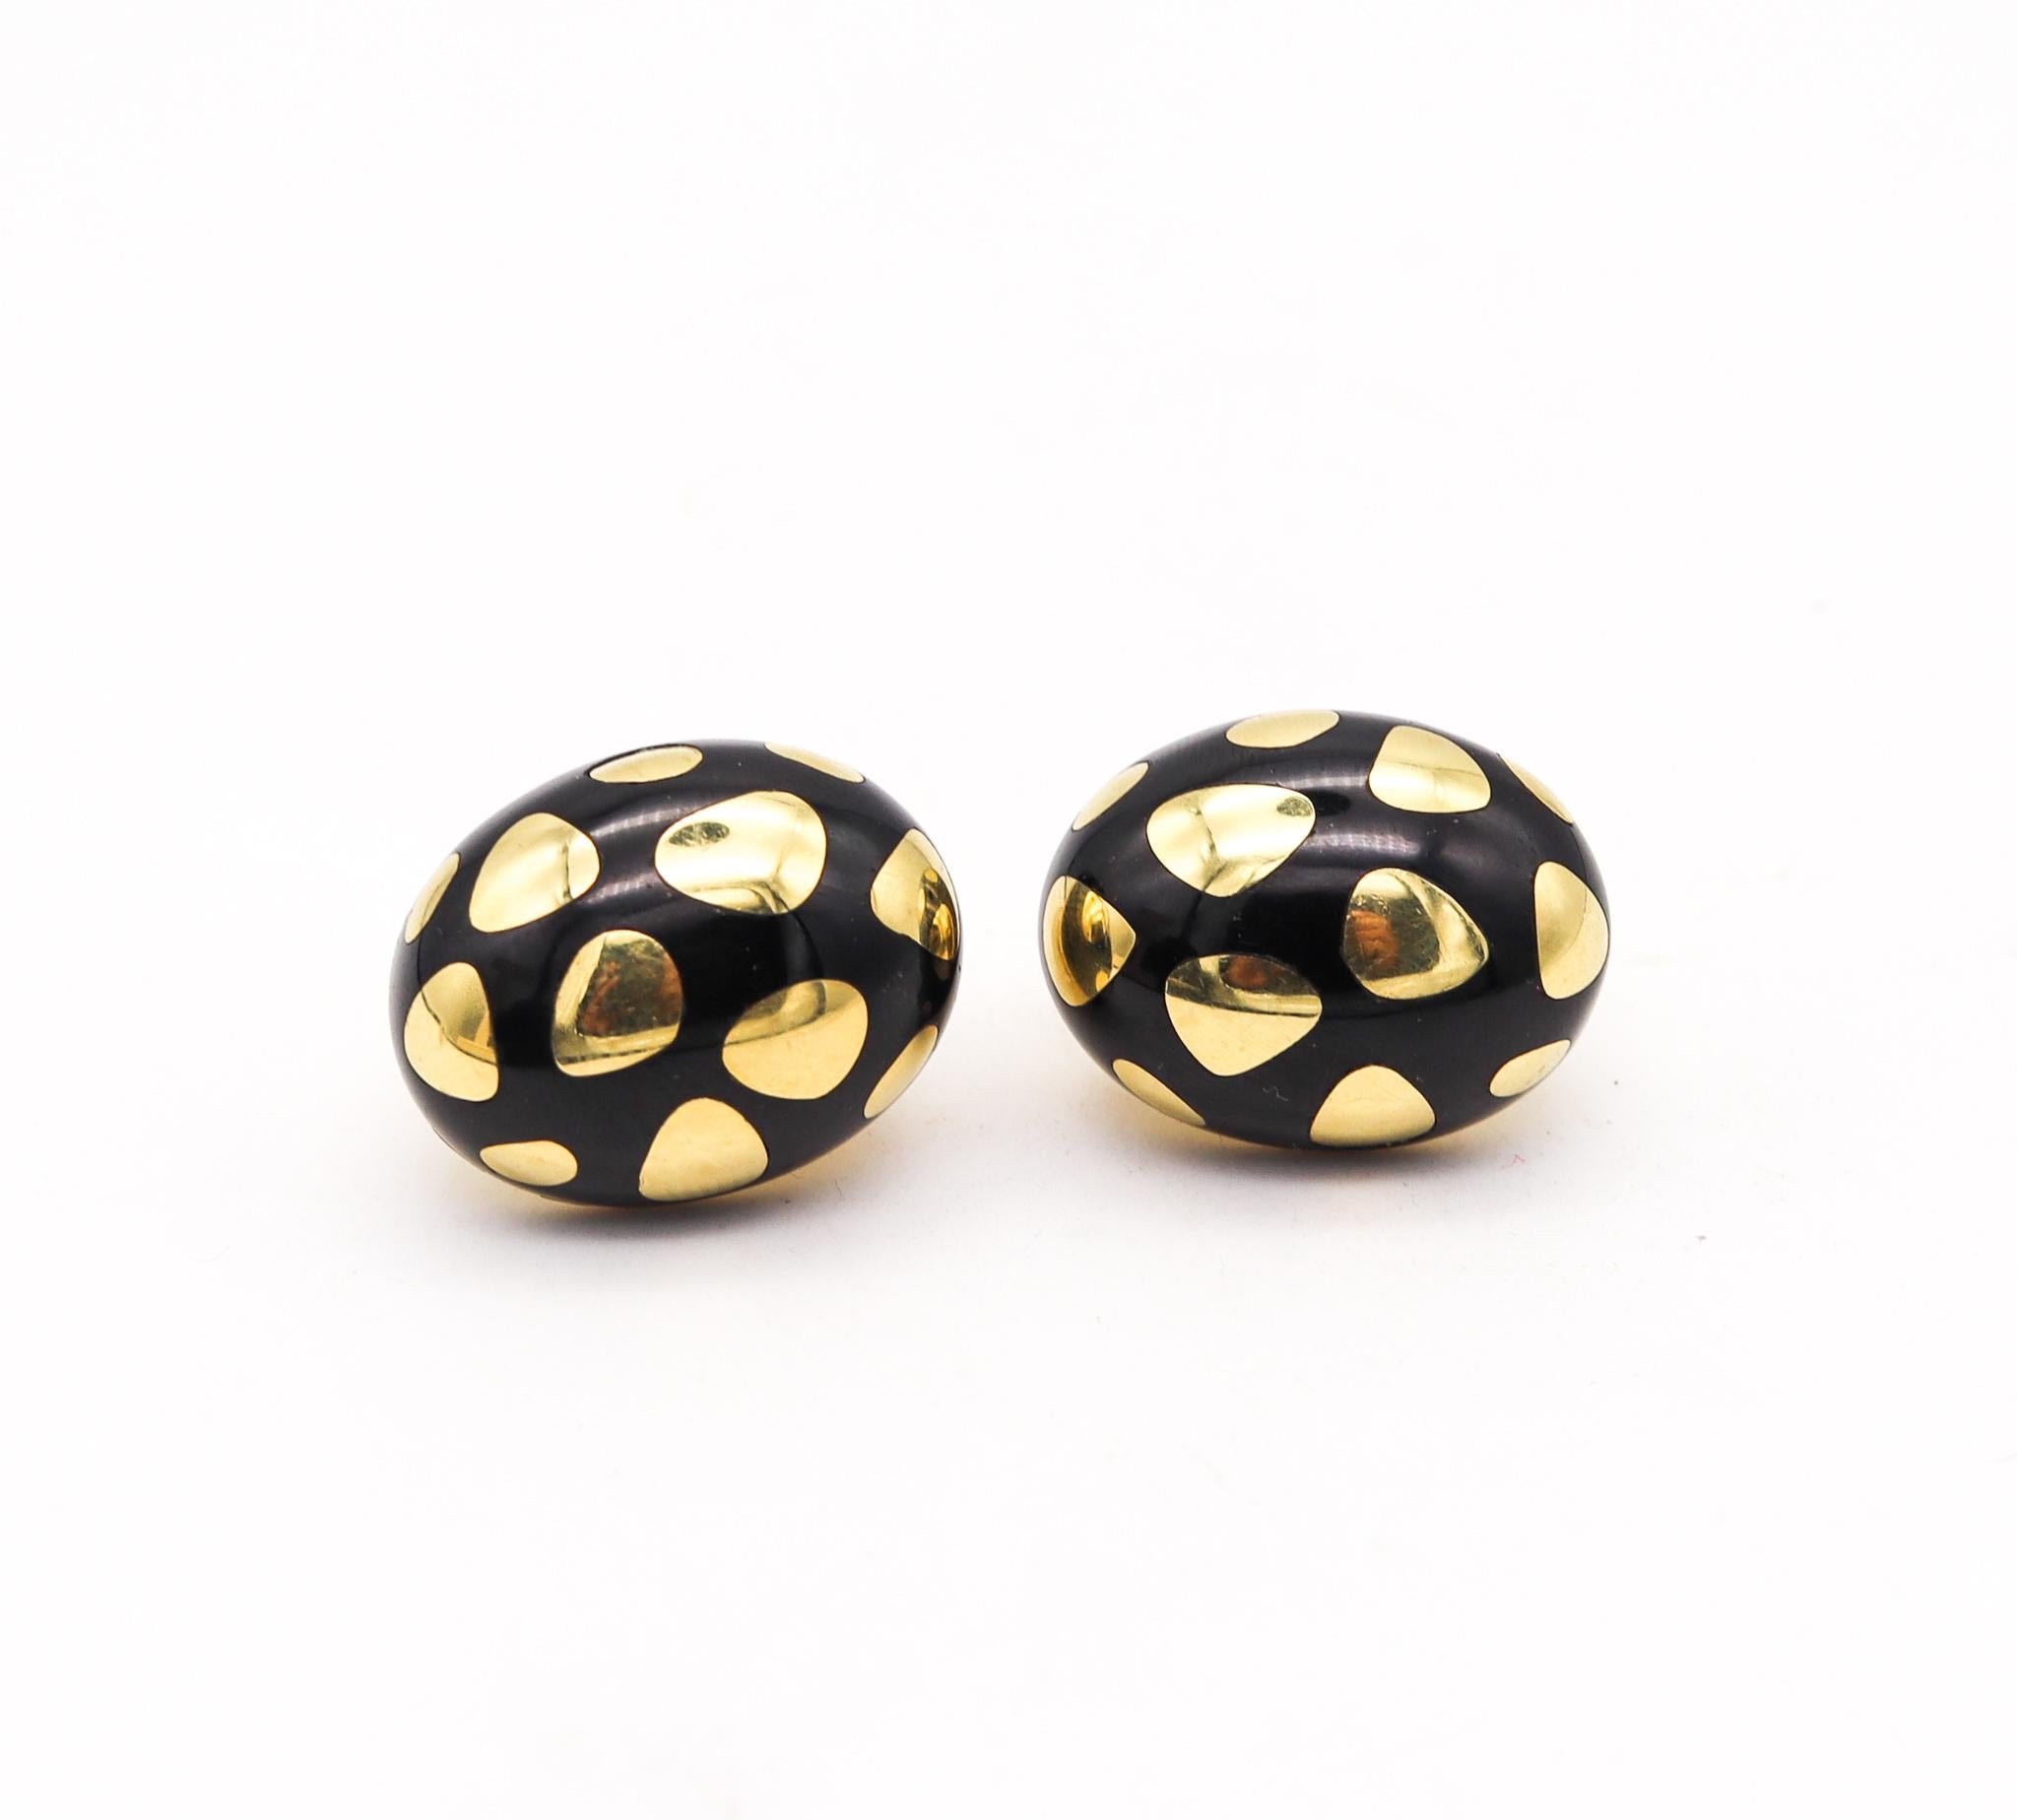 Oversized clip earrings designed by Angela Cummings for Tiffany & Co.

Very rare oversized variant of the iconic polka dot pieces, created in New York city by Cummings at the Tiffany Studios, back in the 1974. These clips earrings has been crafted